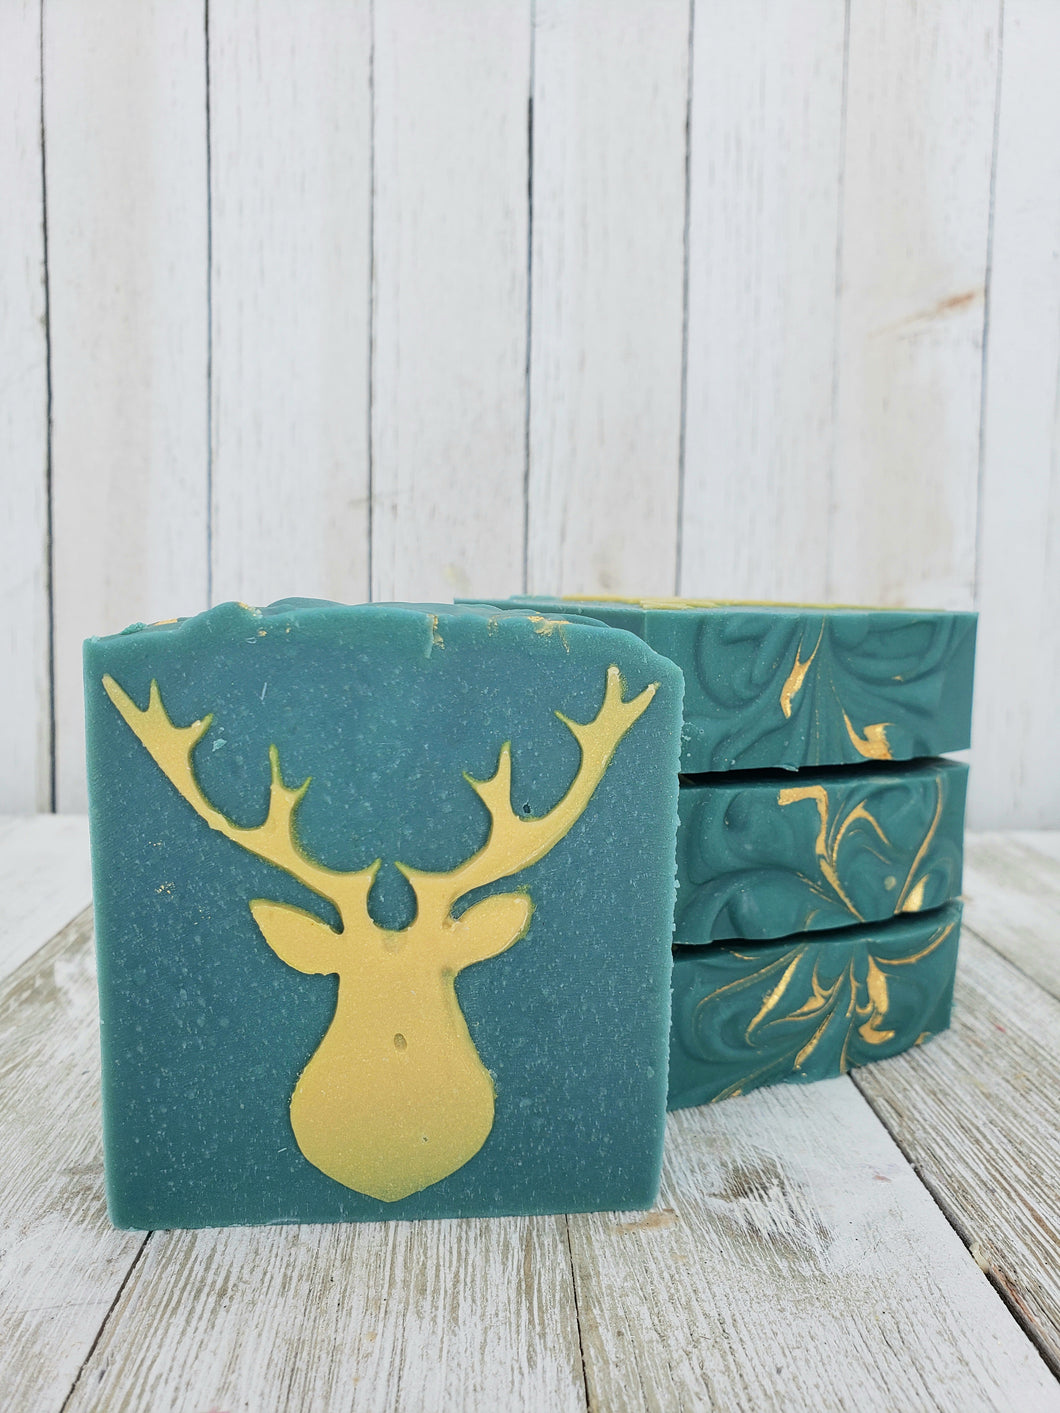 Stag Artisan Soap